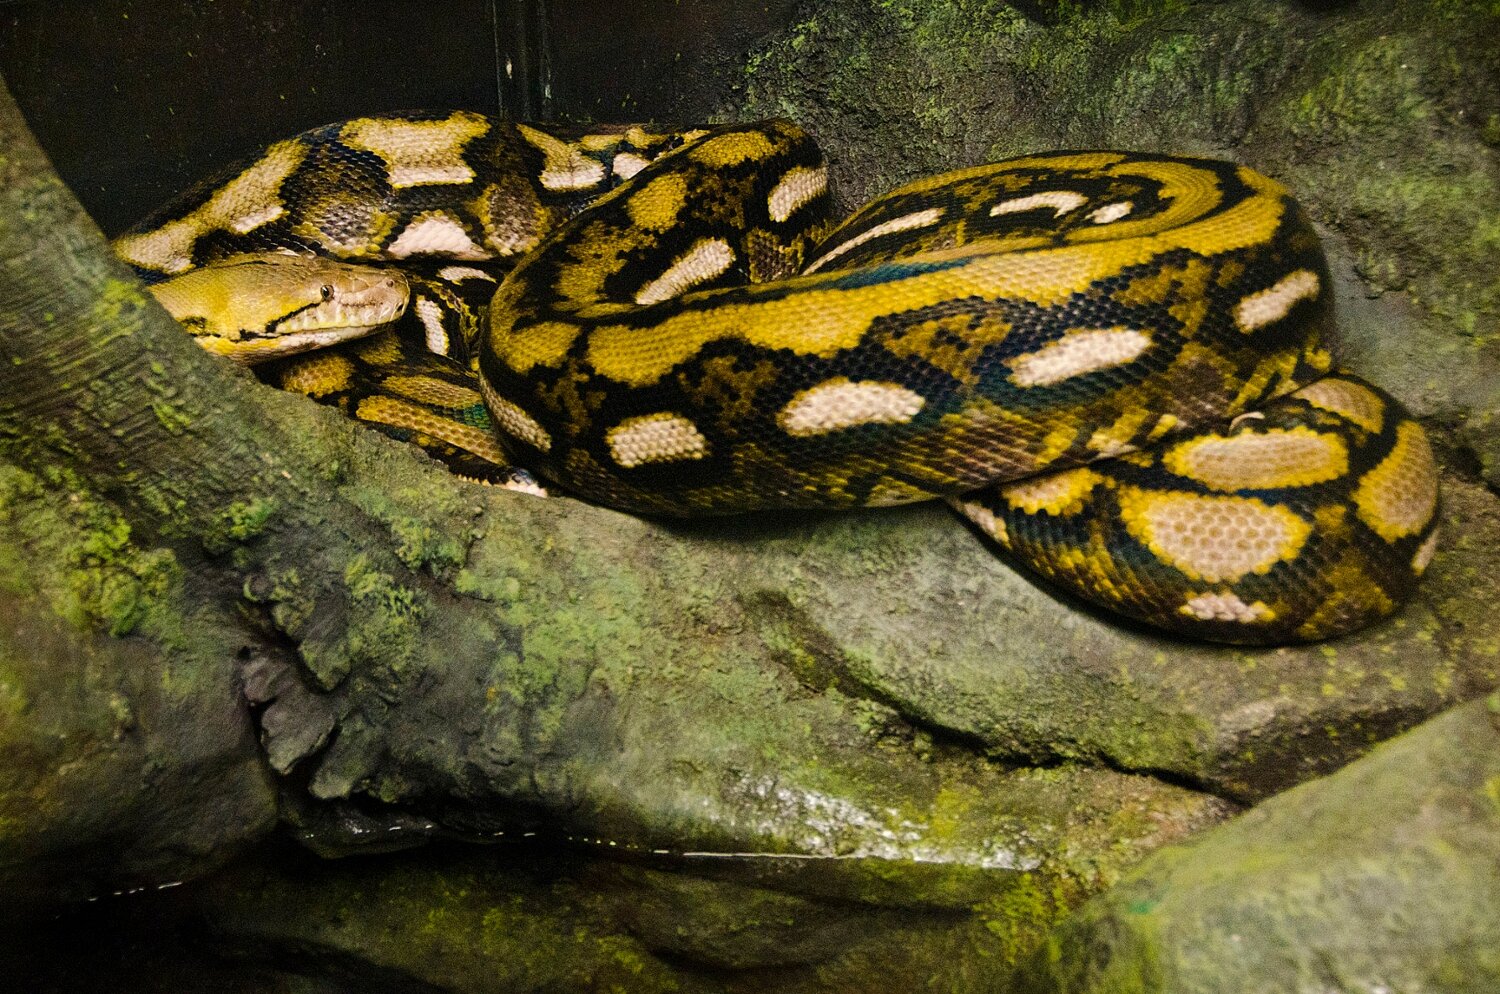 A new male reticulated python has just gone on exhibit at Woodland Park Zoo and he needs a name. Through May 13, noon PDT, submit a name to the zoo’s Facebook page. Photo credit: Ryan Hawk/Woodland Park Zoo